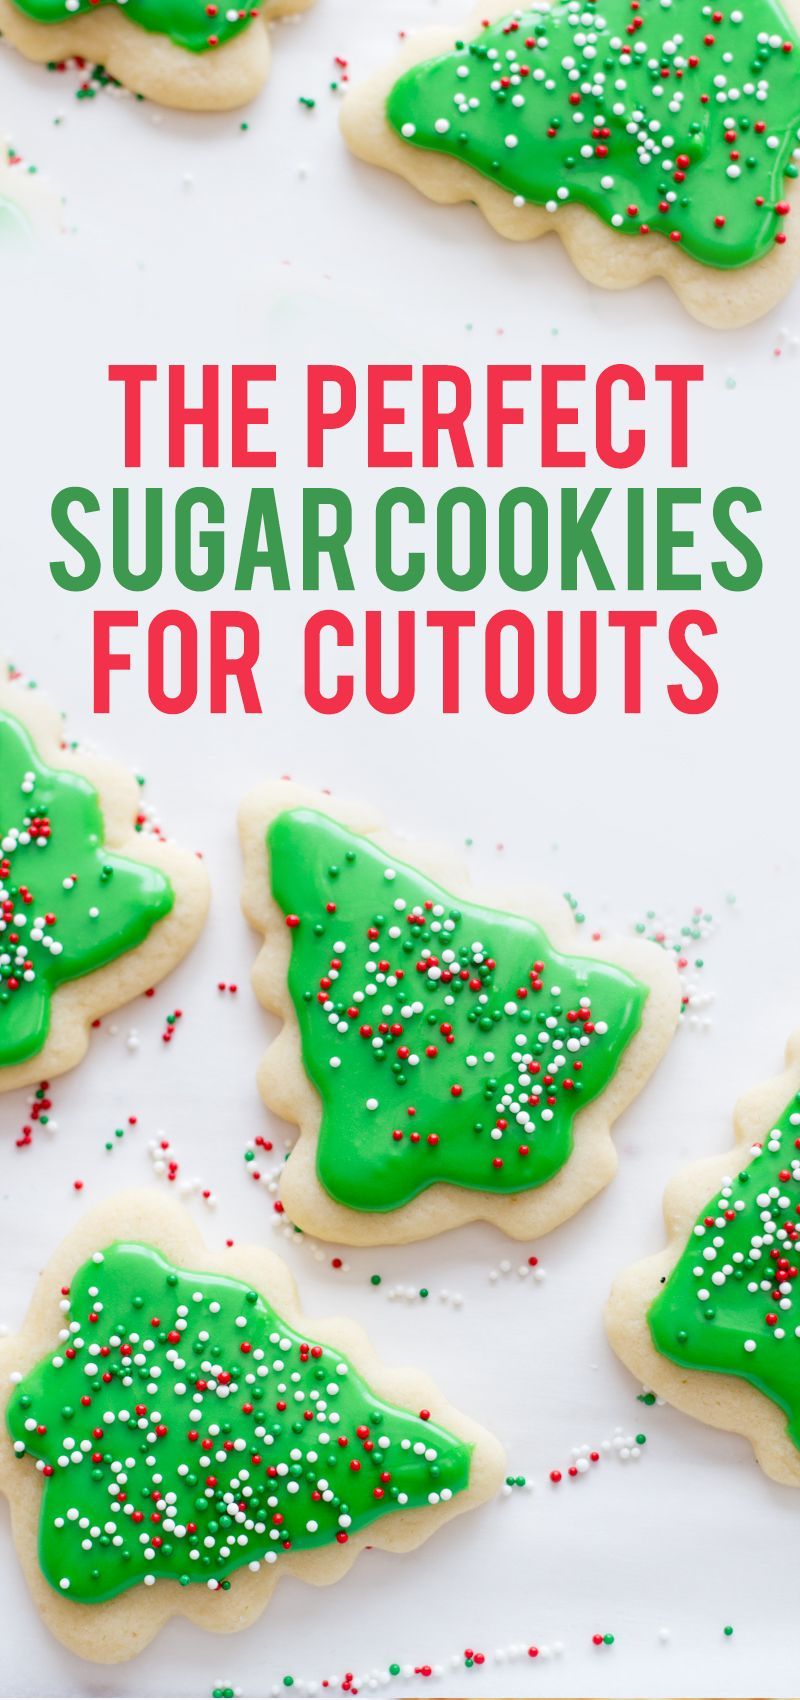 Looking for the perfect sugar cookie recipe for cutouts? This is it! Delicious, mildly flavored, and they don’t spread in the